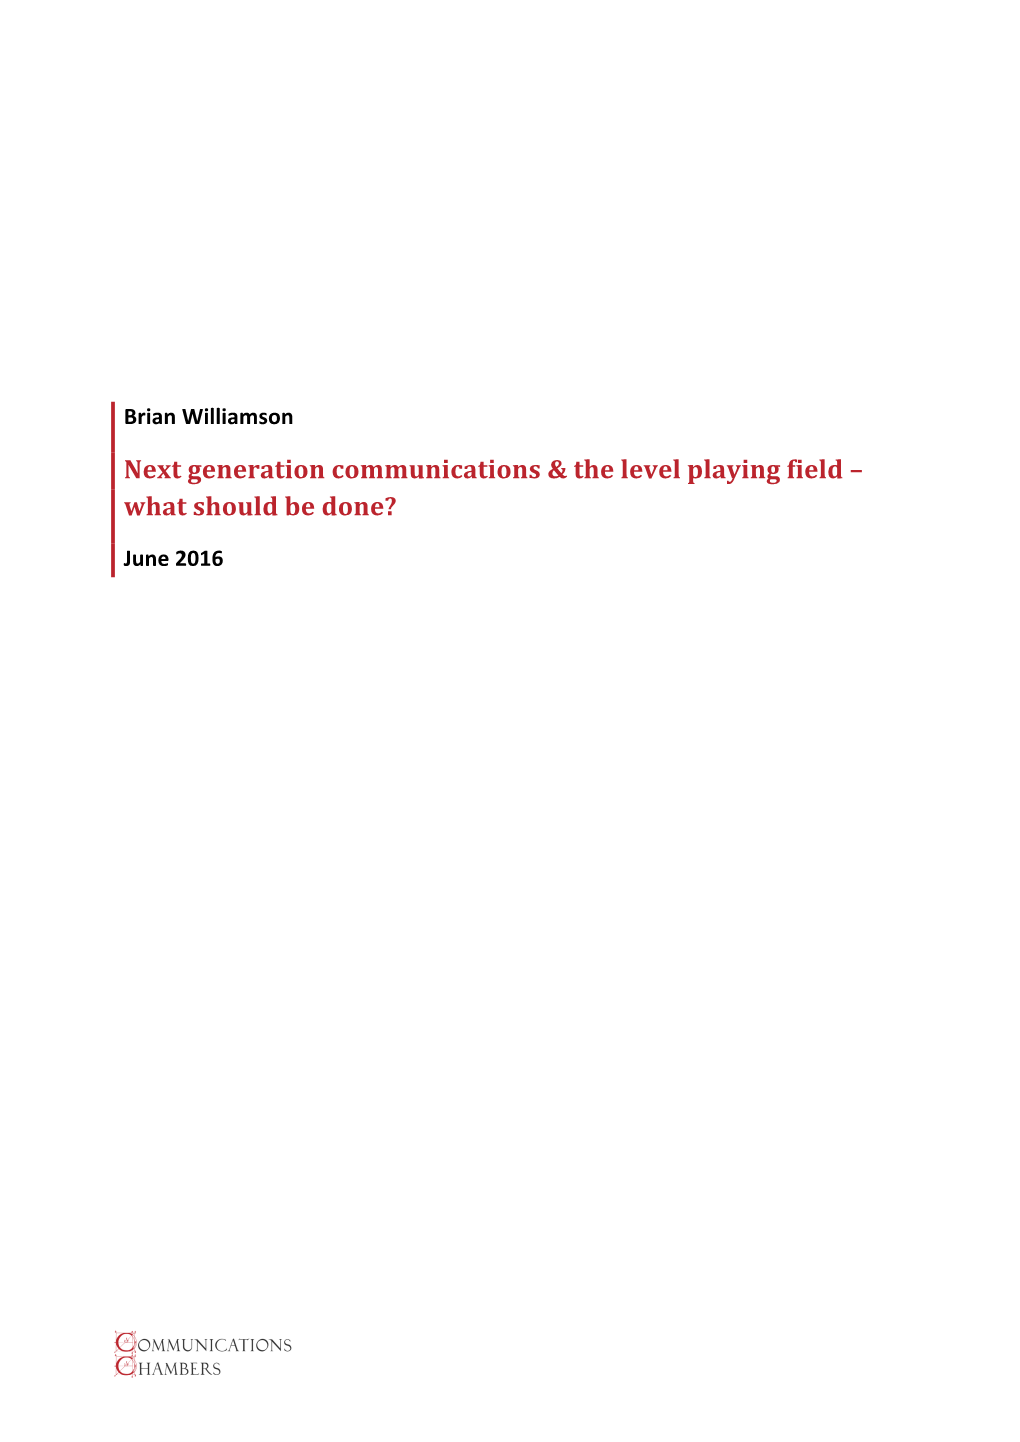 Next Generation Communications & the Level Playing Field – What Should